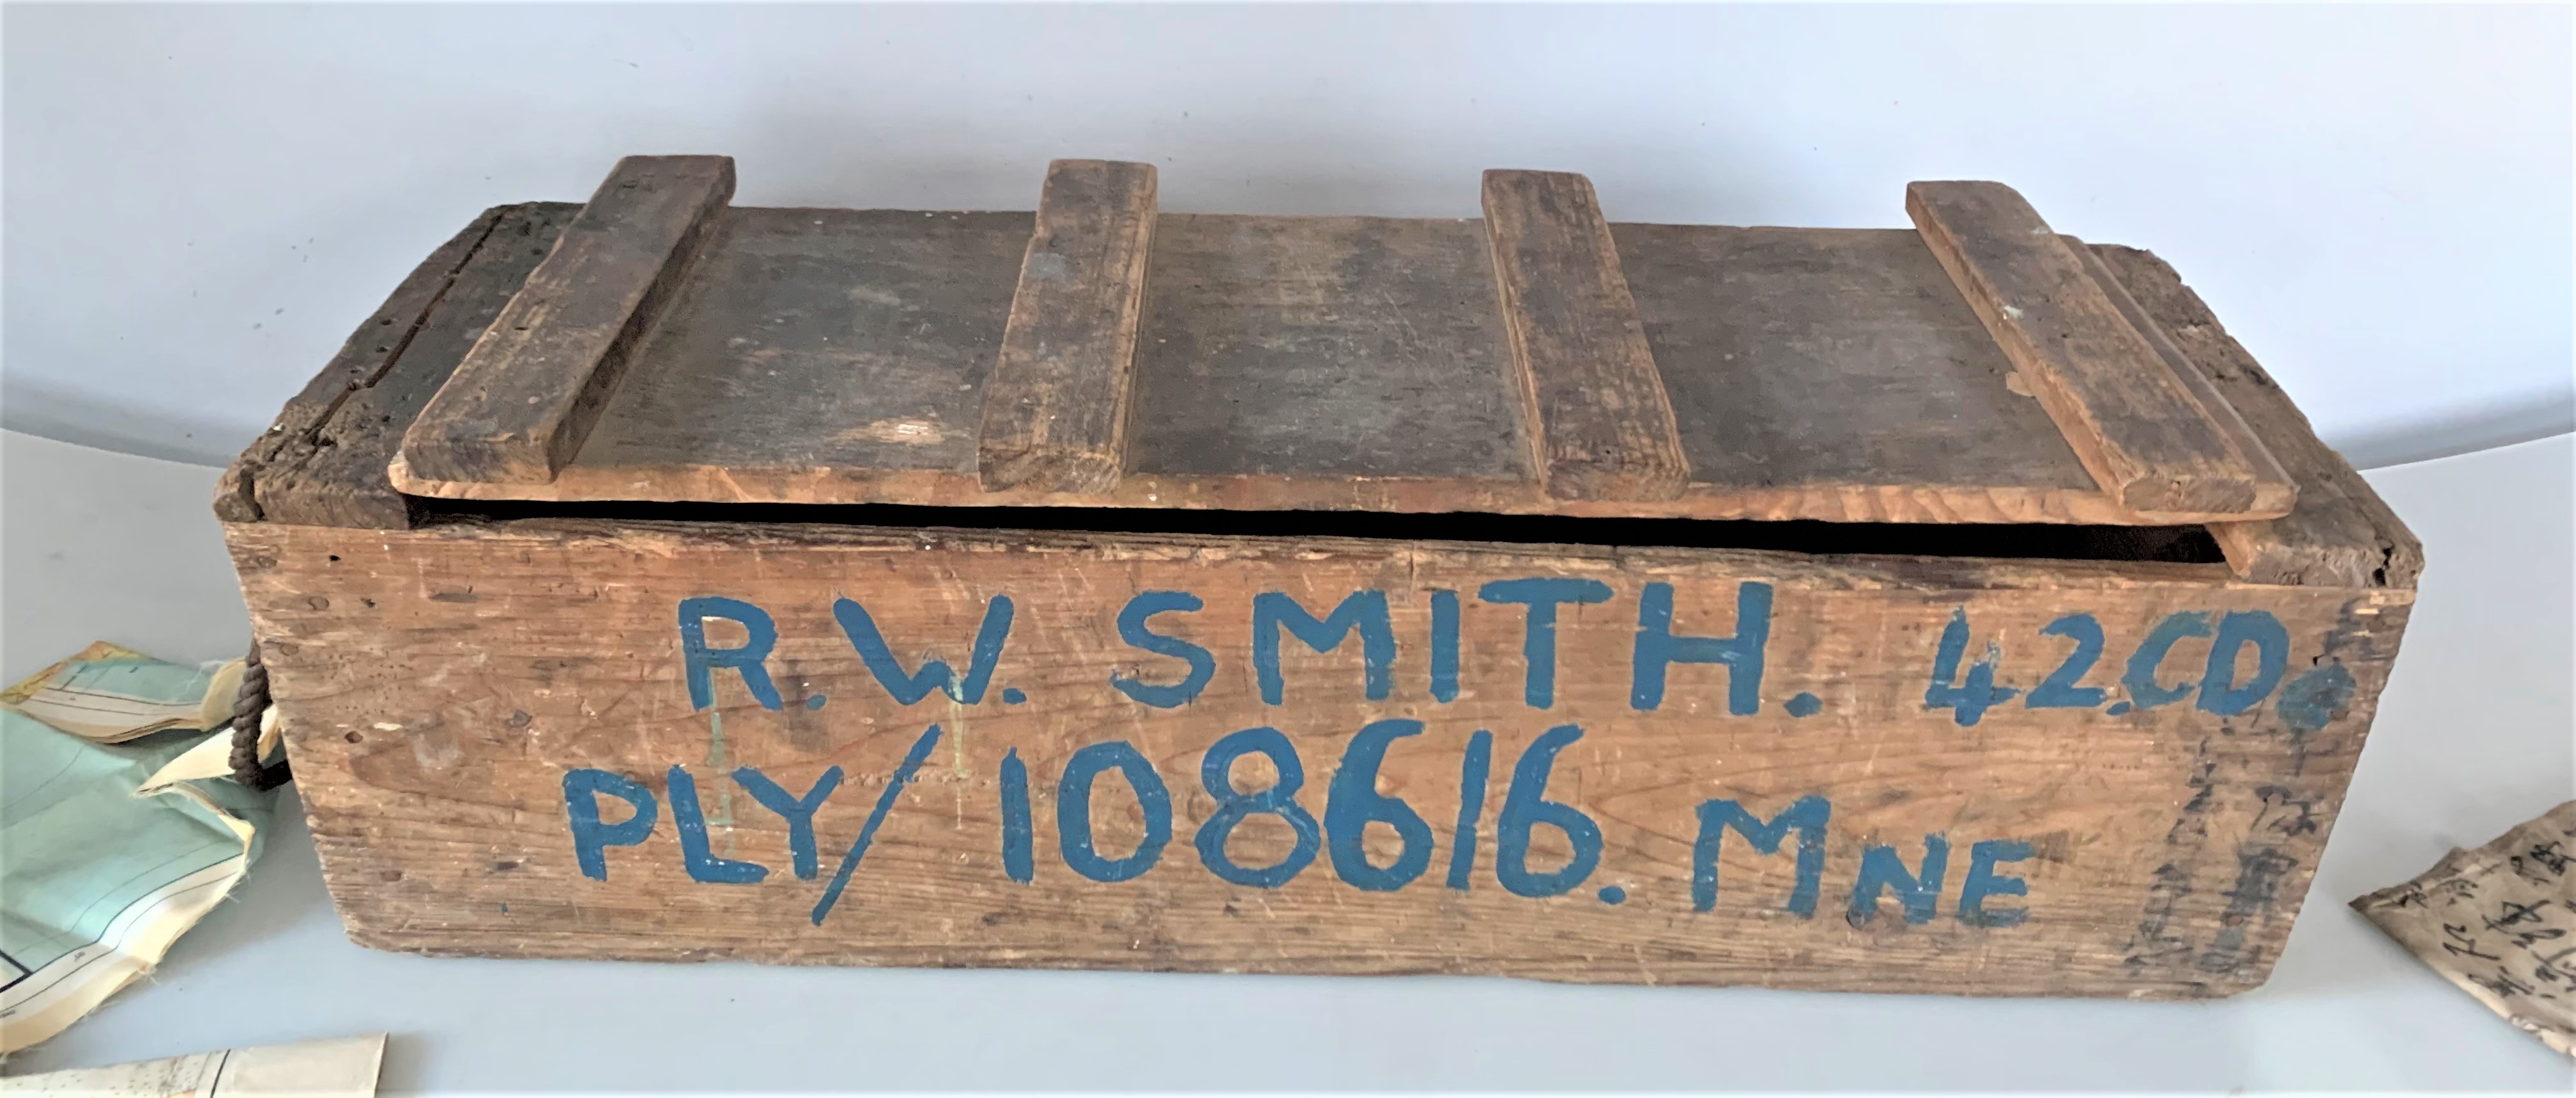 Important collection of militaria belonging to Robert Wellesley Smith, Royal Marines Commando - Image 17 of 33